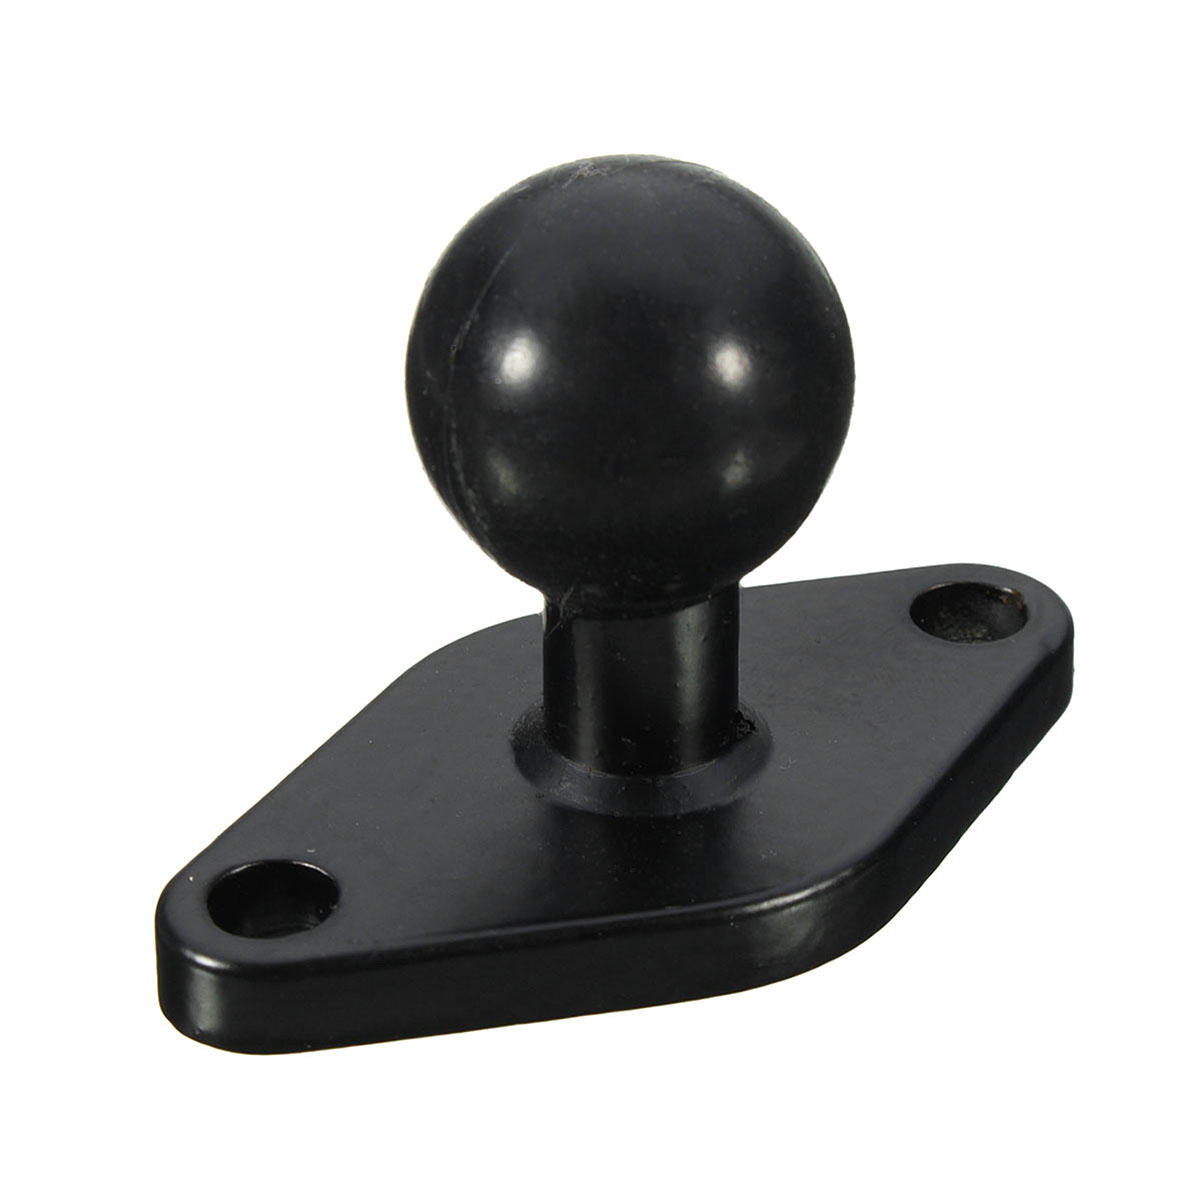 Black Motorcycle GPS Holder Mounting Aluminum 1inch Ball with Diamond Shape Plate